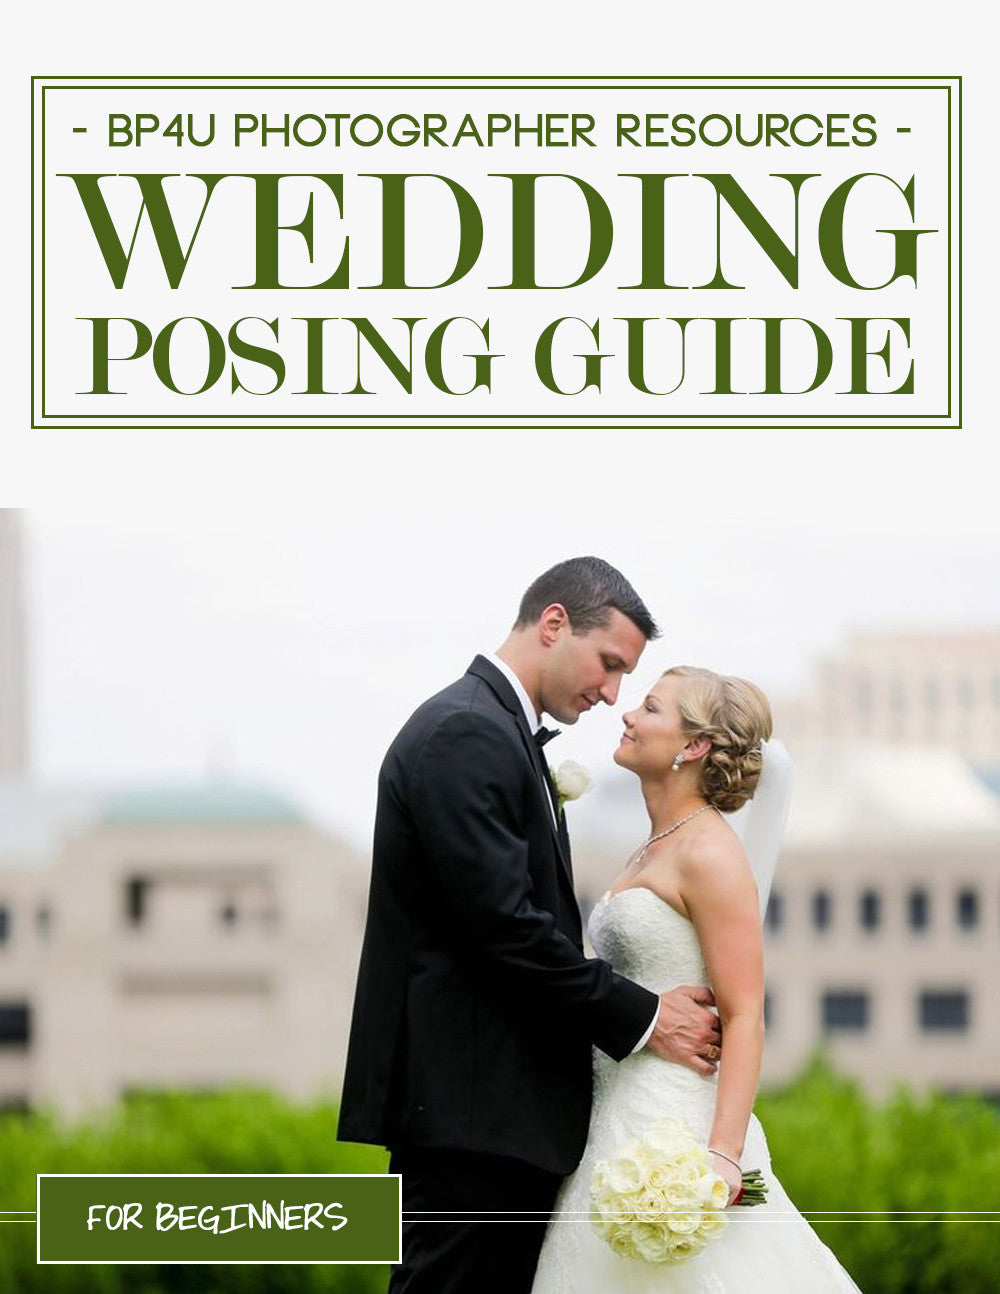 Wedding Photography for Beginners | Step by Step Posing Guide & Cards -  BP4U Photographer Resources